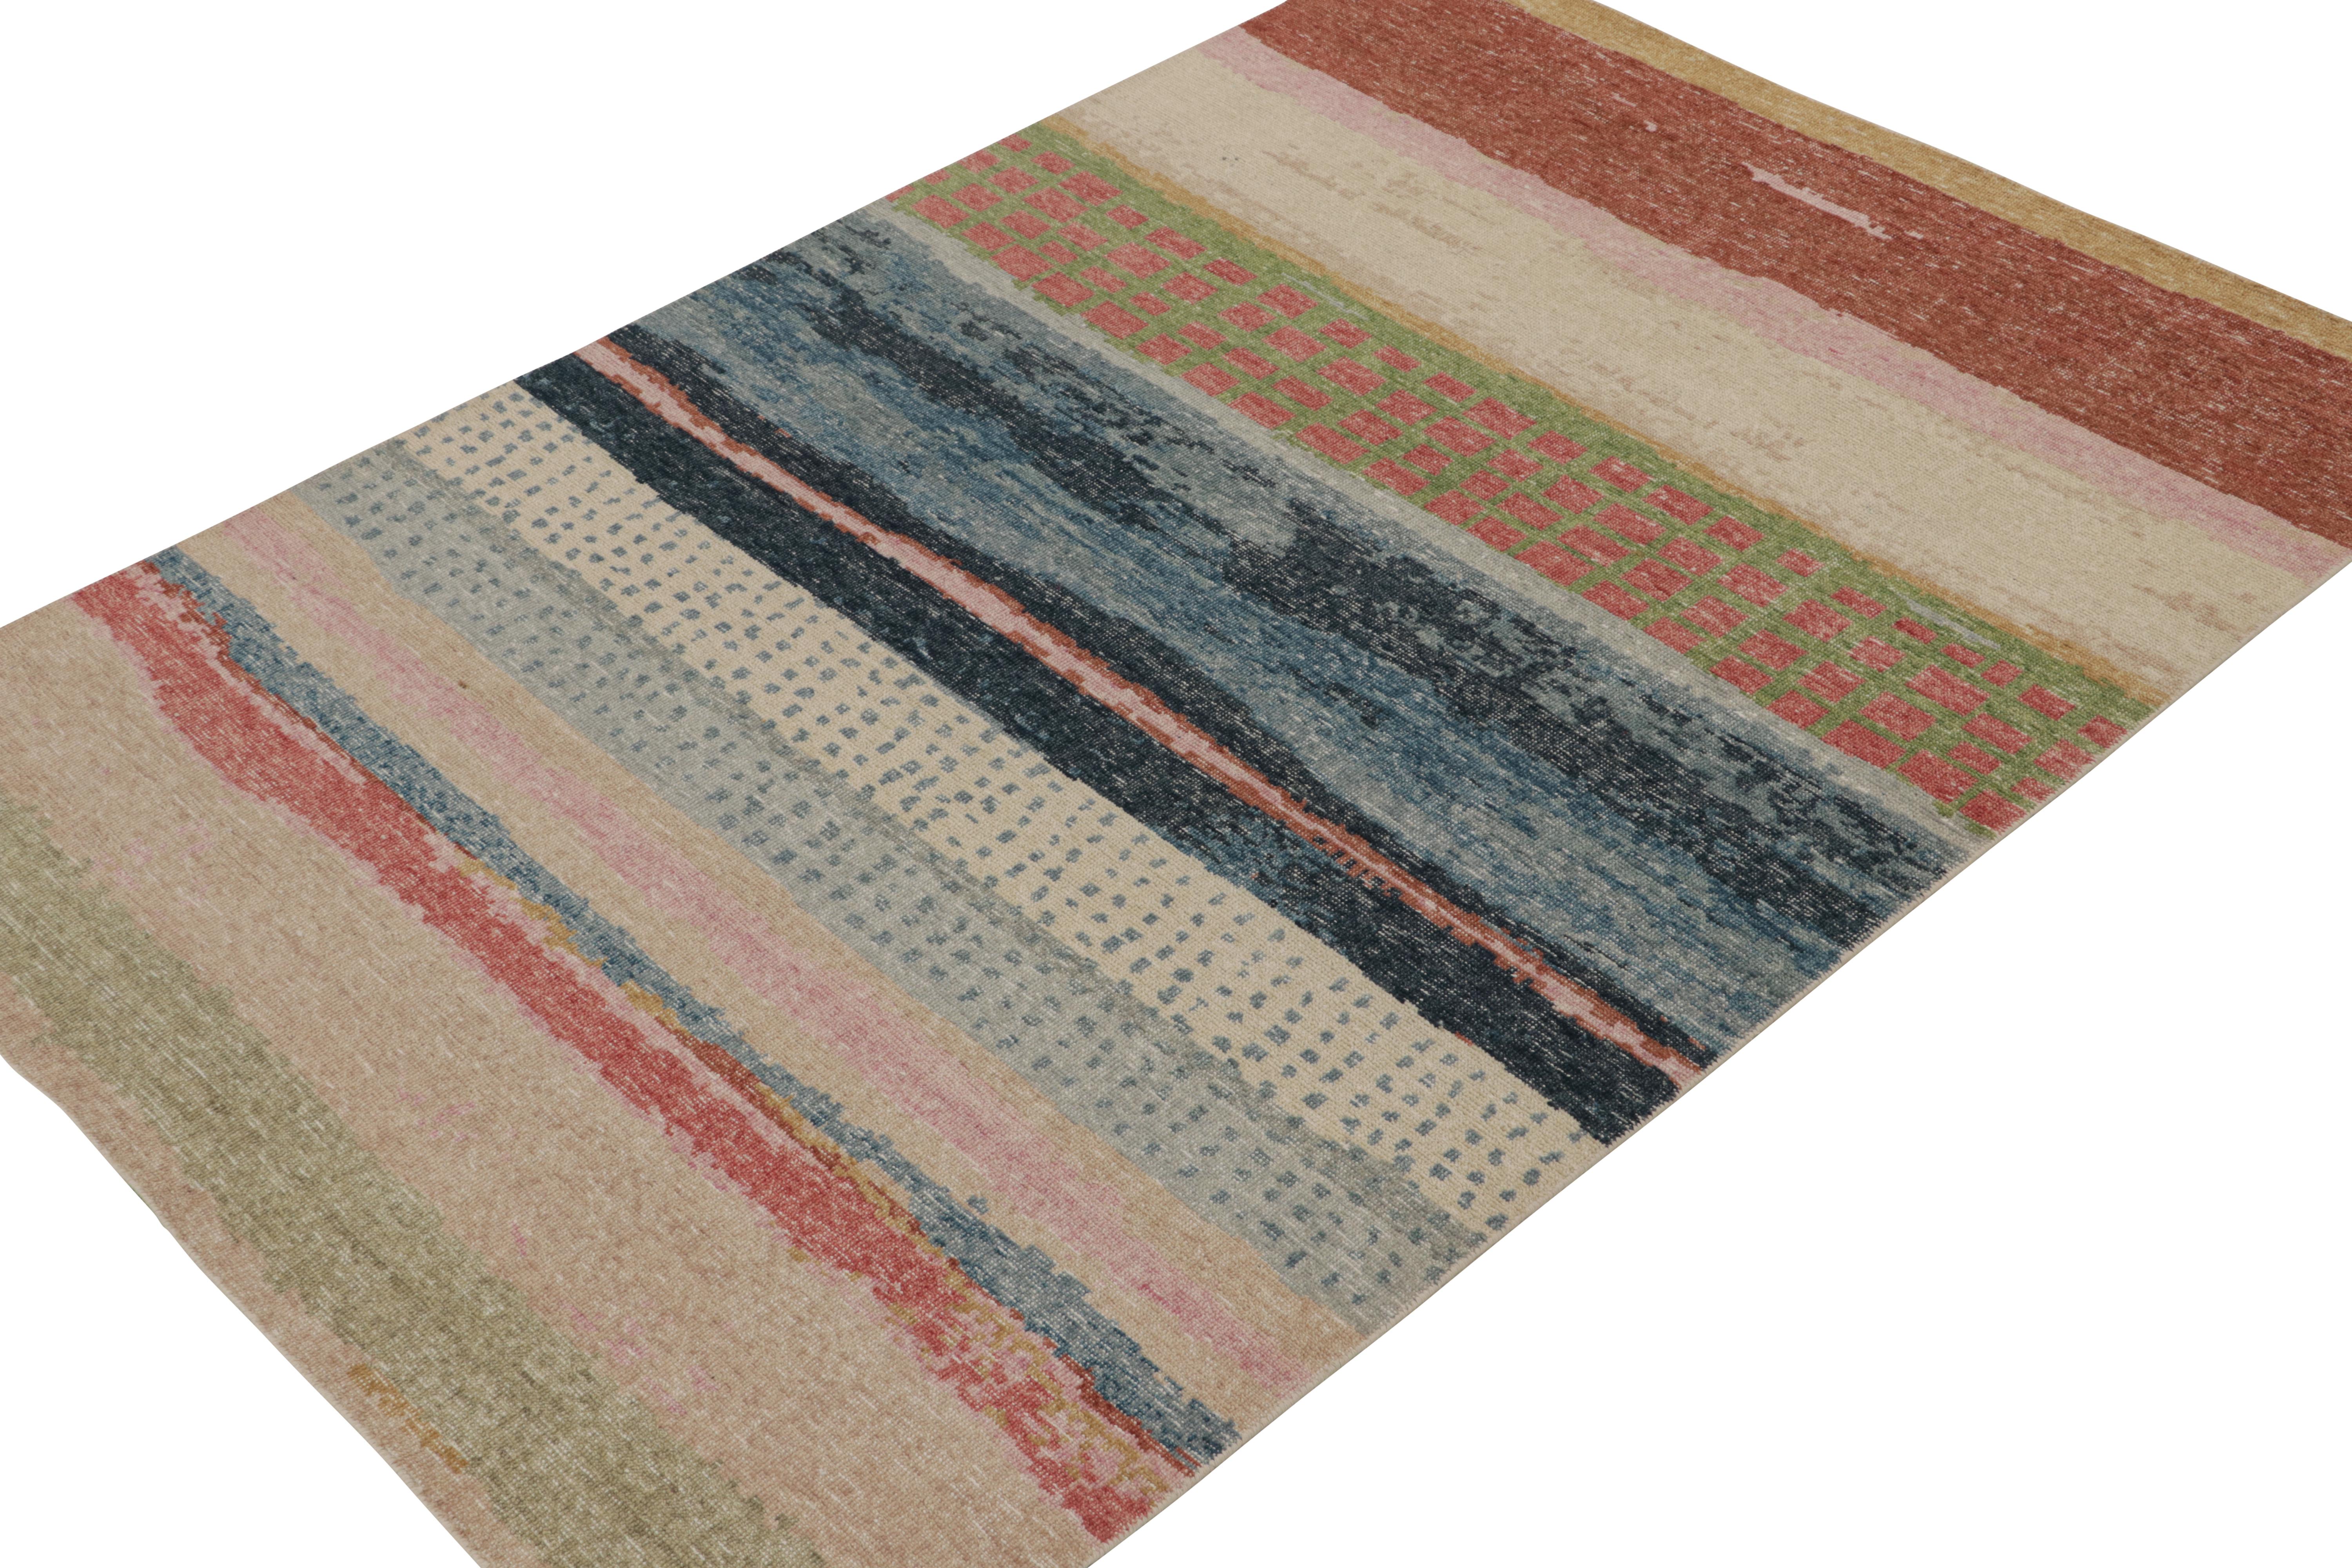 This contemporary 6x9 abstract rug is a new addition to the Homage Collection by Rug & Kilim. Hand-knotted in wool and cotton.

Further On the Design:

This design enjoys a splash of colors with horizontal stripes, dots, and other painterly